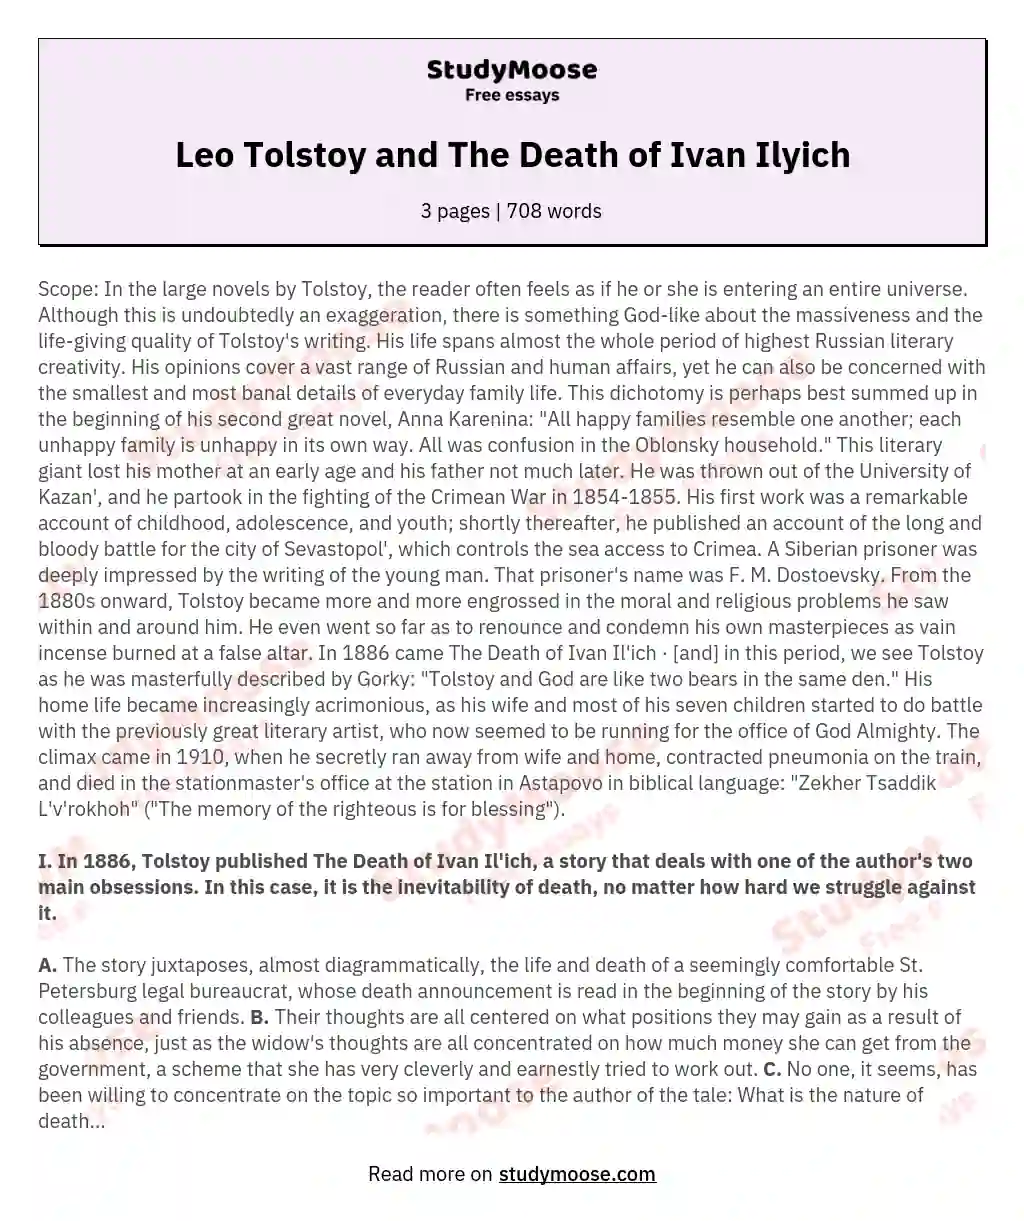 Leo Tolstoy and The Death of Ivan Ilyich essay